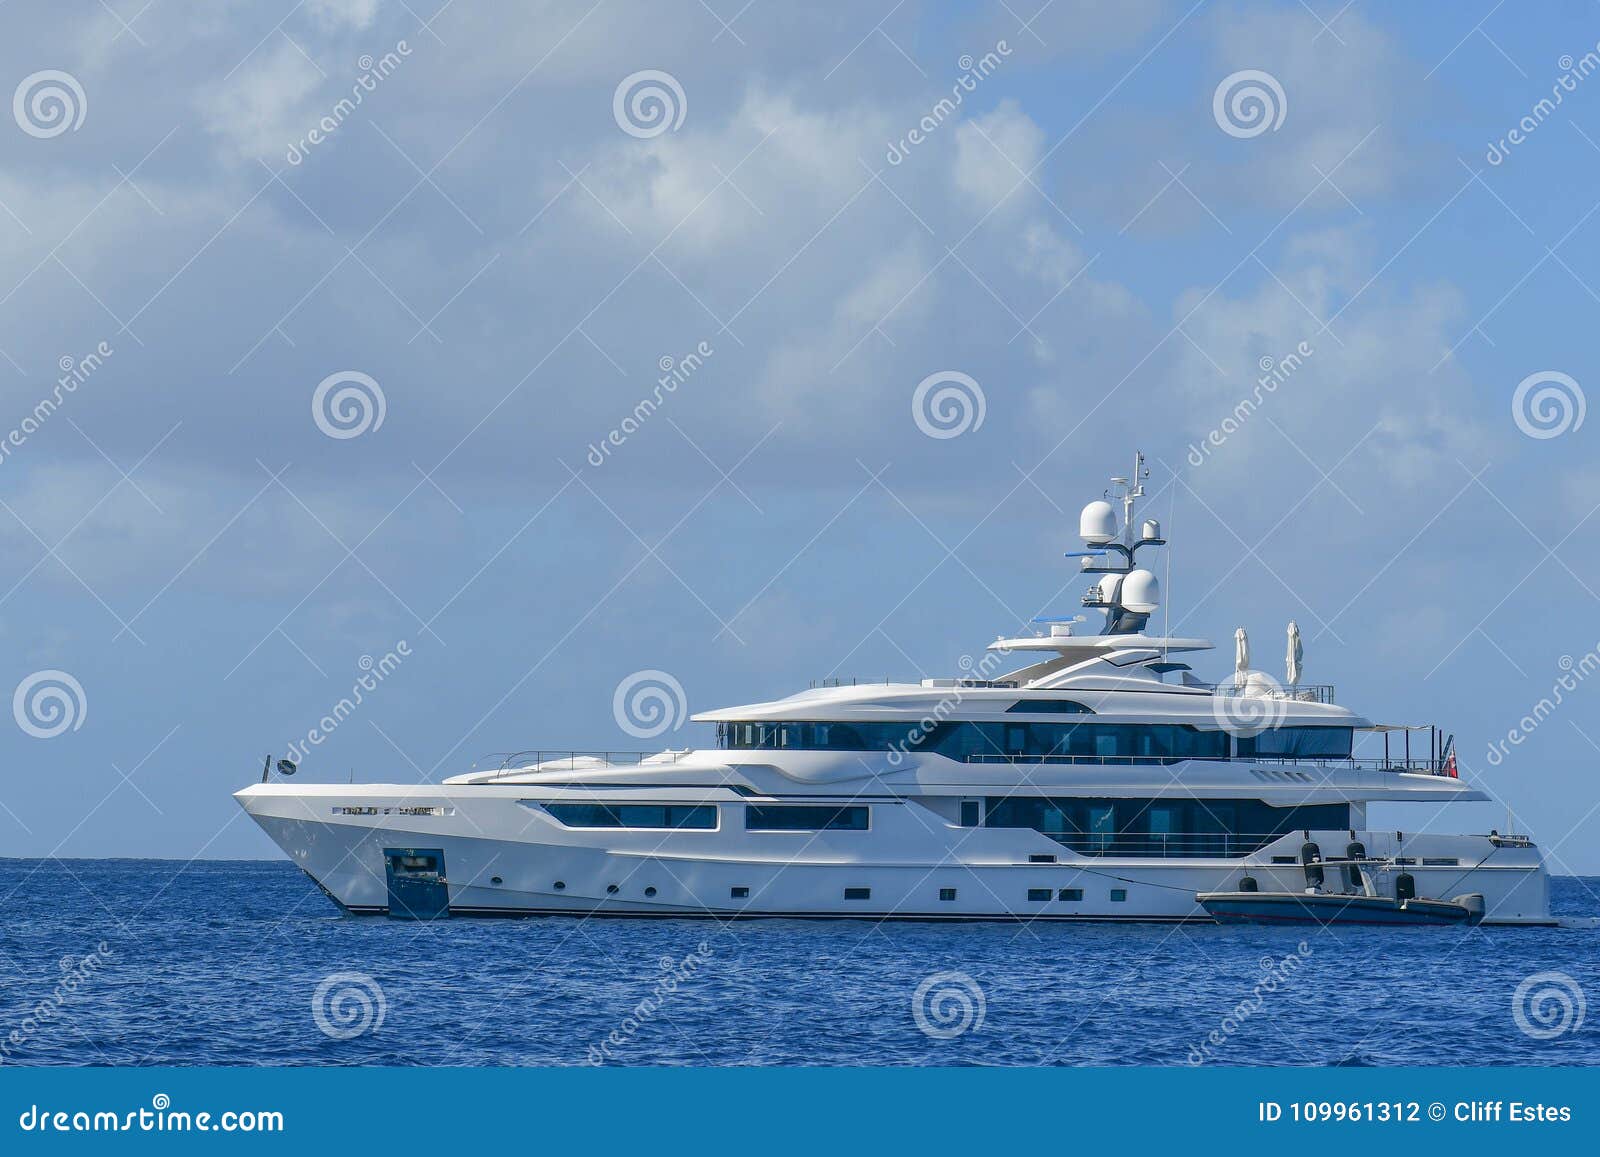 megayacht and tender in caribbean islands